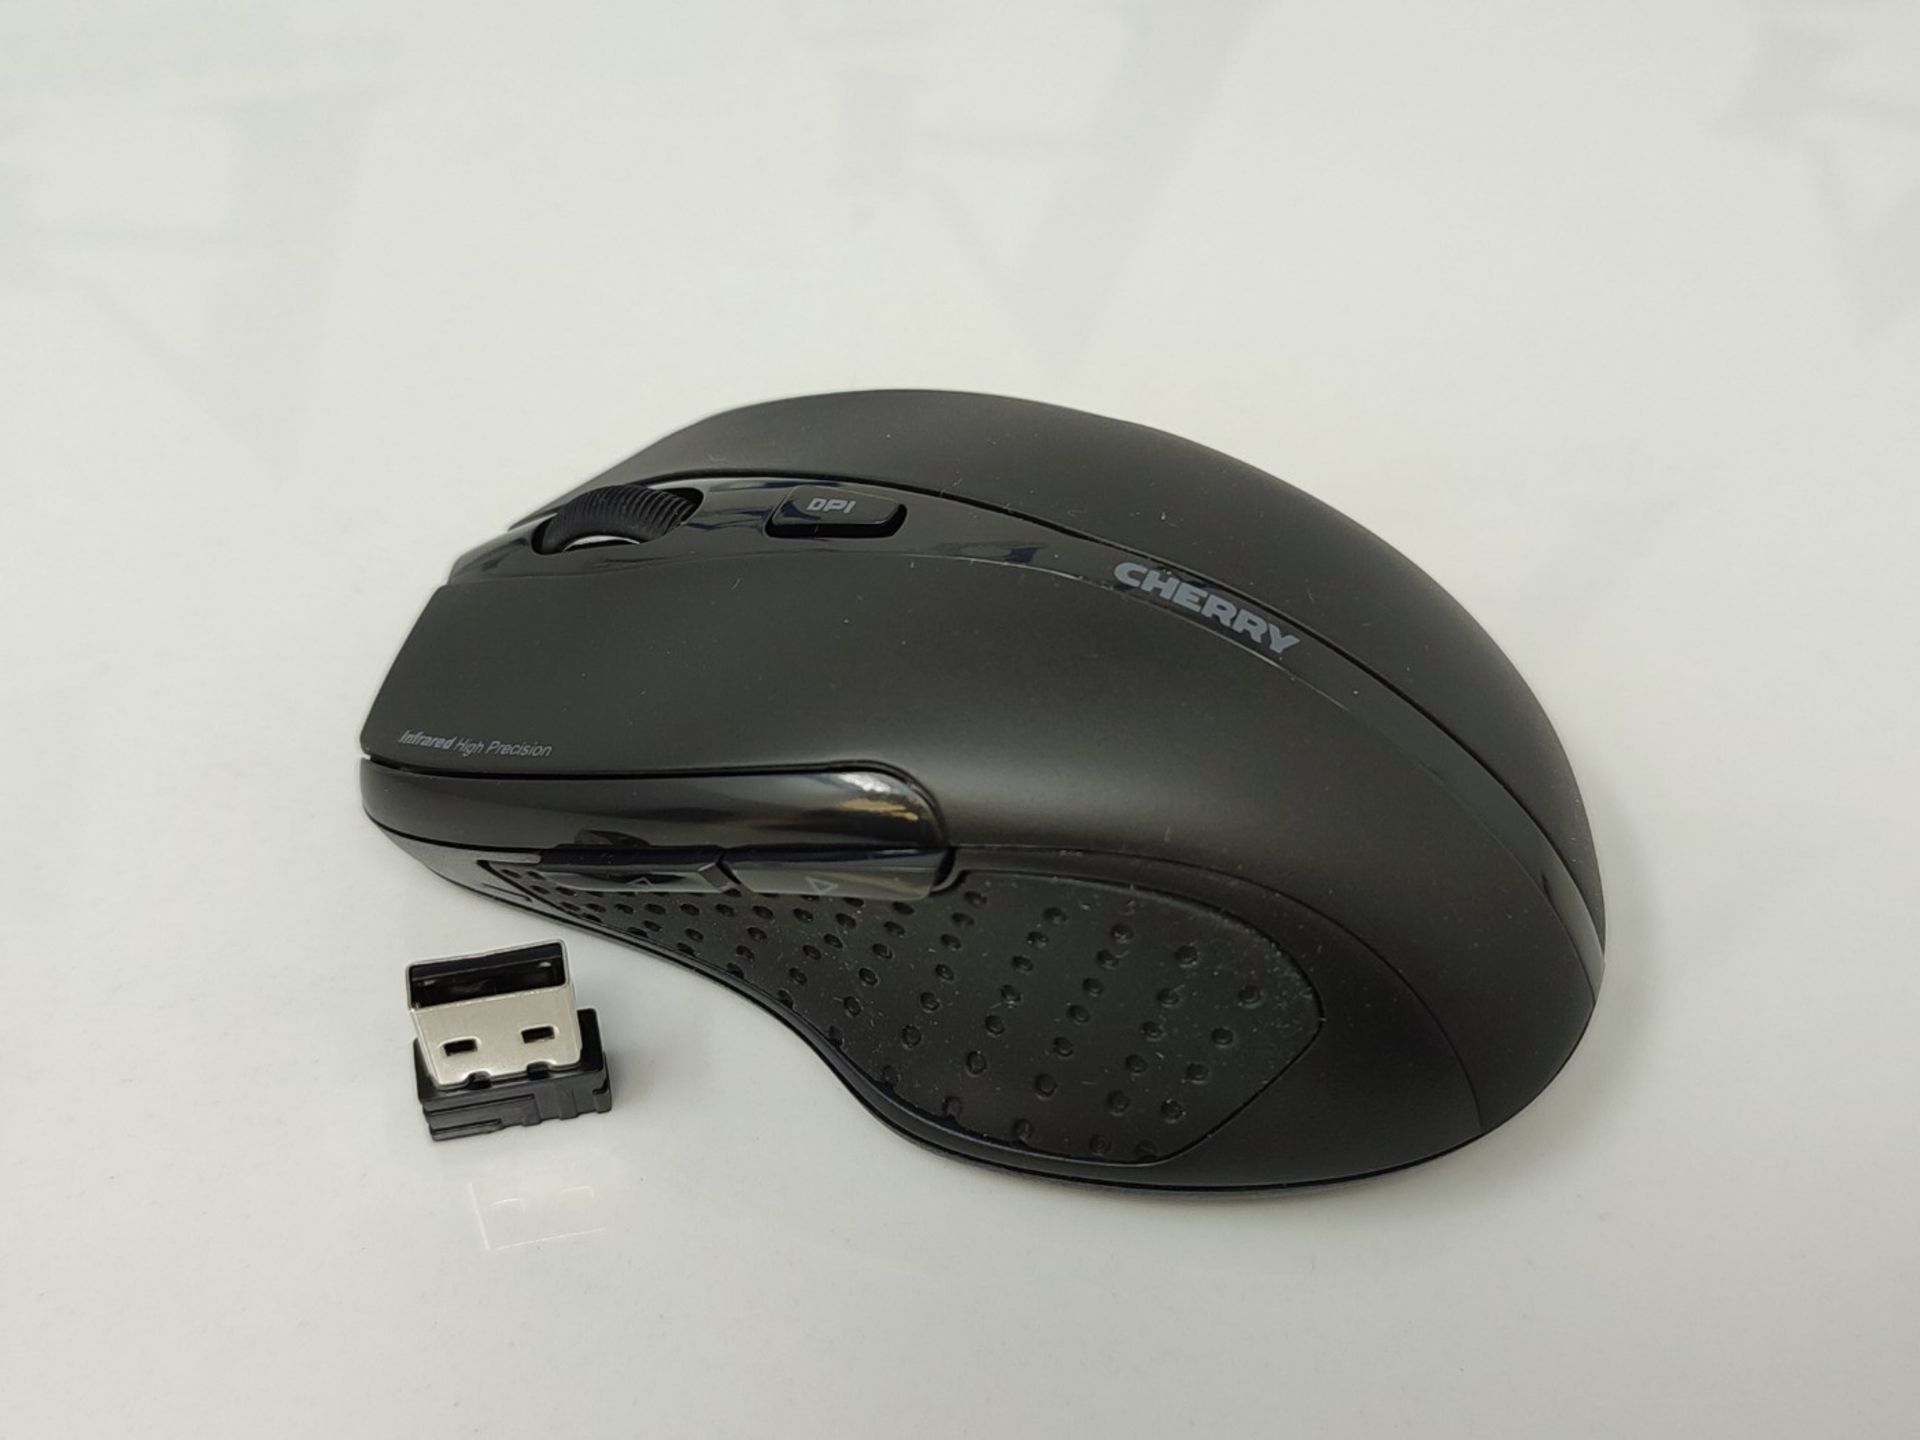 CHERRY MW 3000, wireless mouse, ergonomic right-handed mouse, 6 buttons: infrared sens - Image 3 of 3